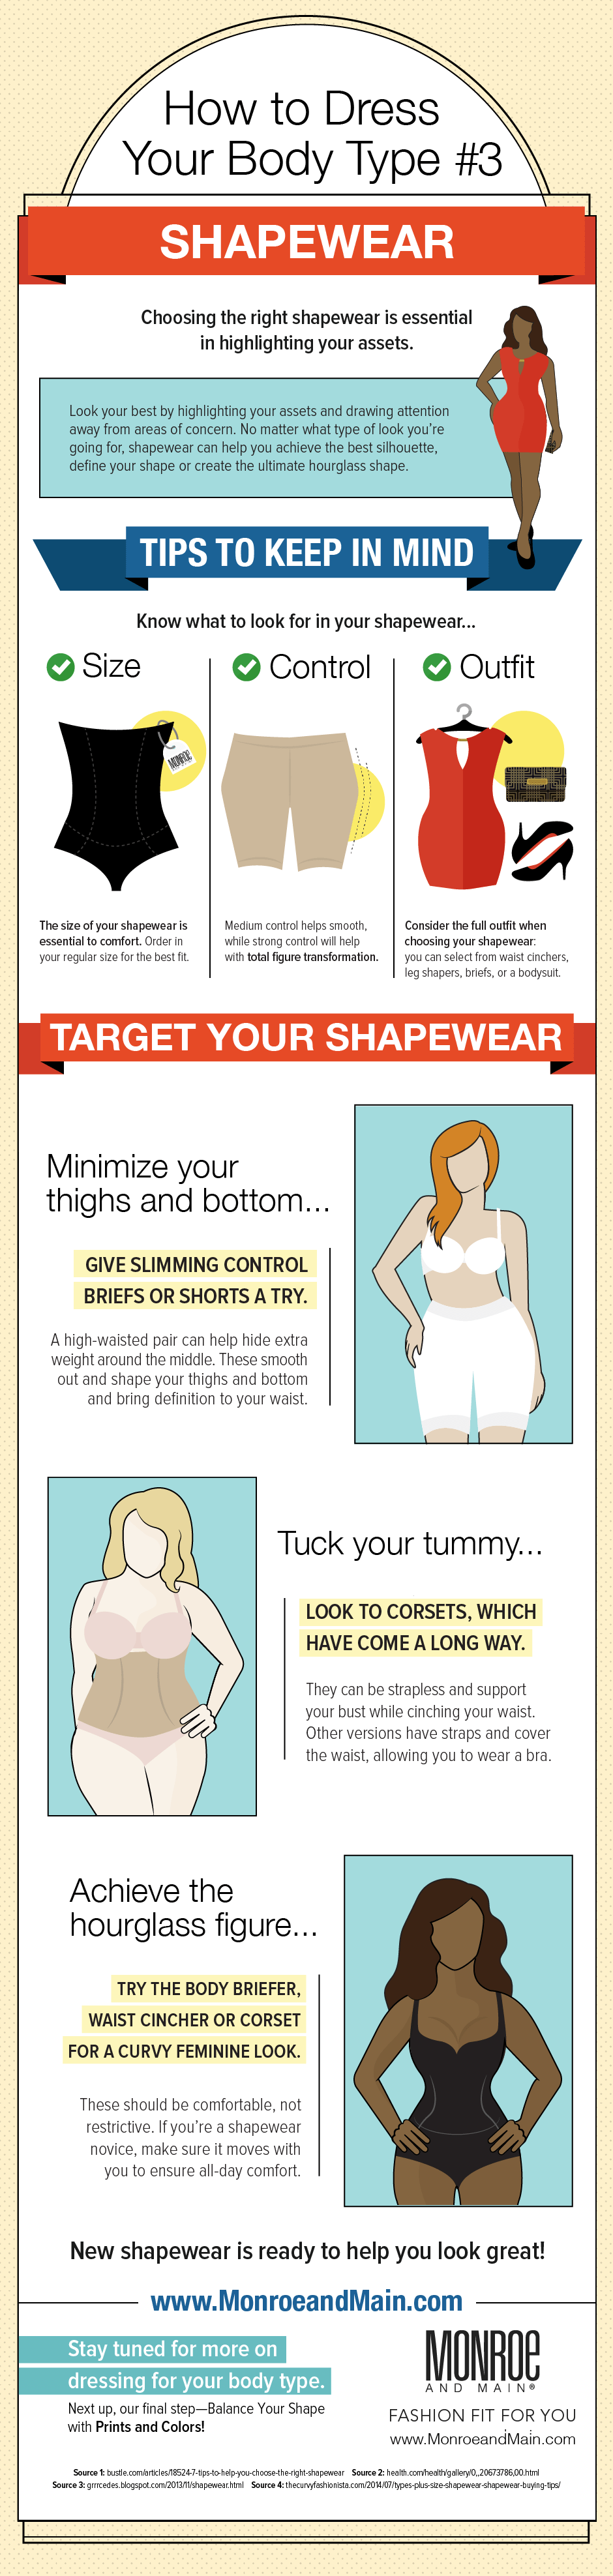 Dressing for your body type: Tips and tricks for flattering your